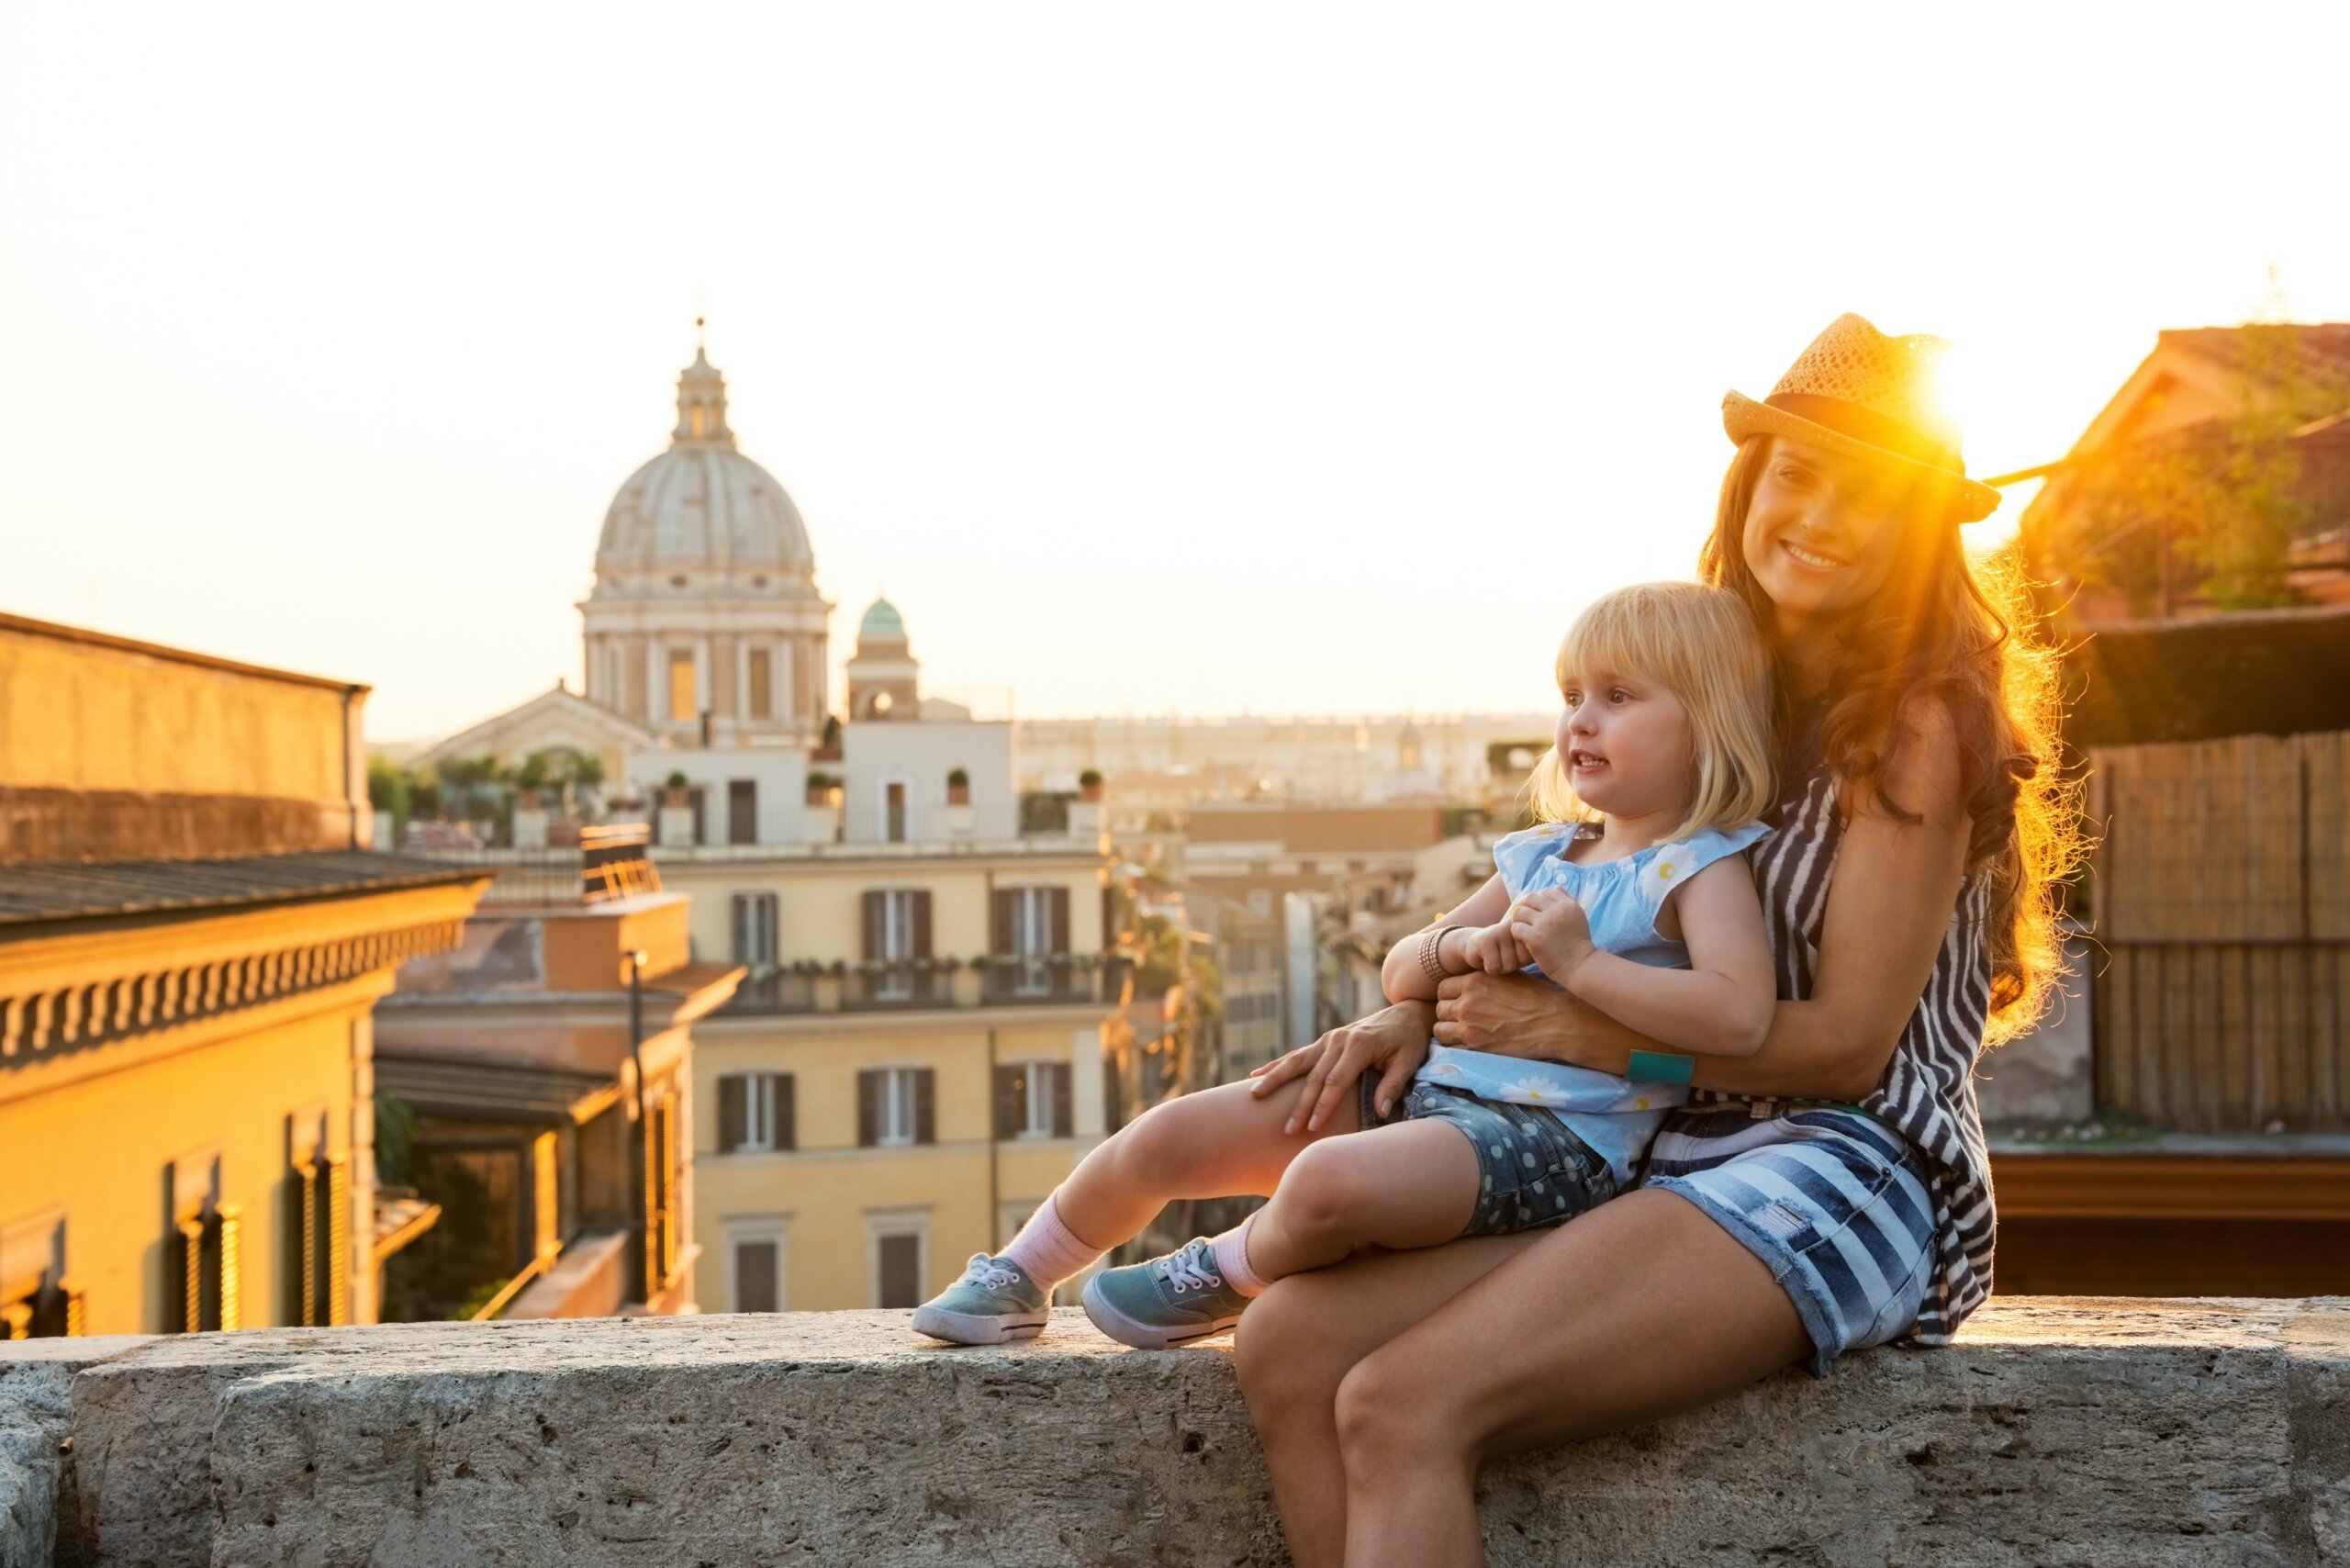 Woman and young girl sitting on wall overlooking city